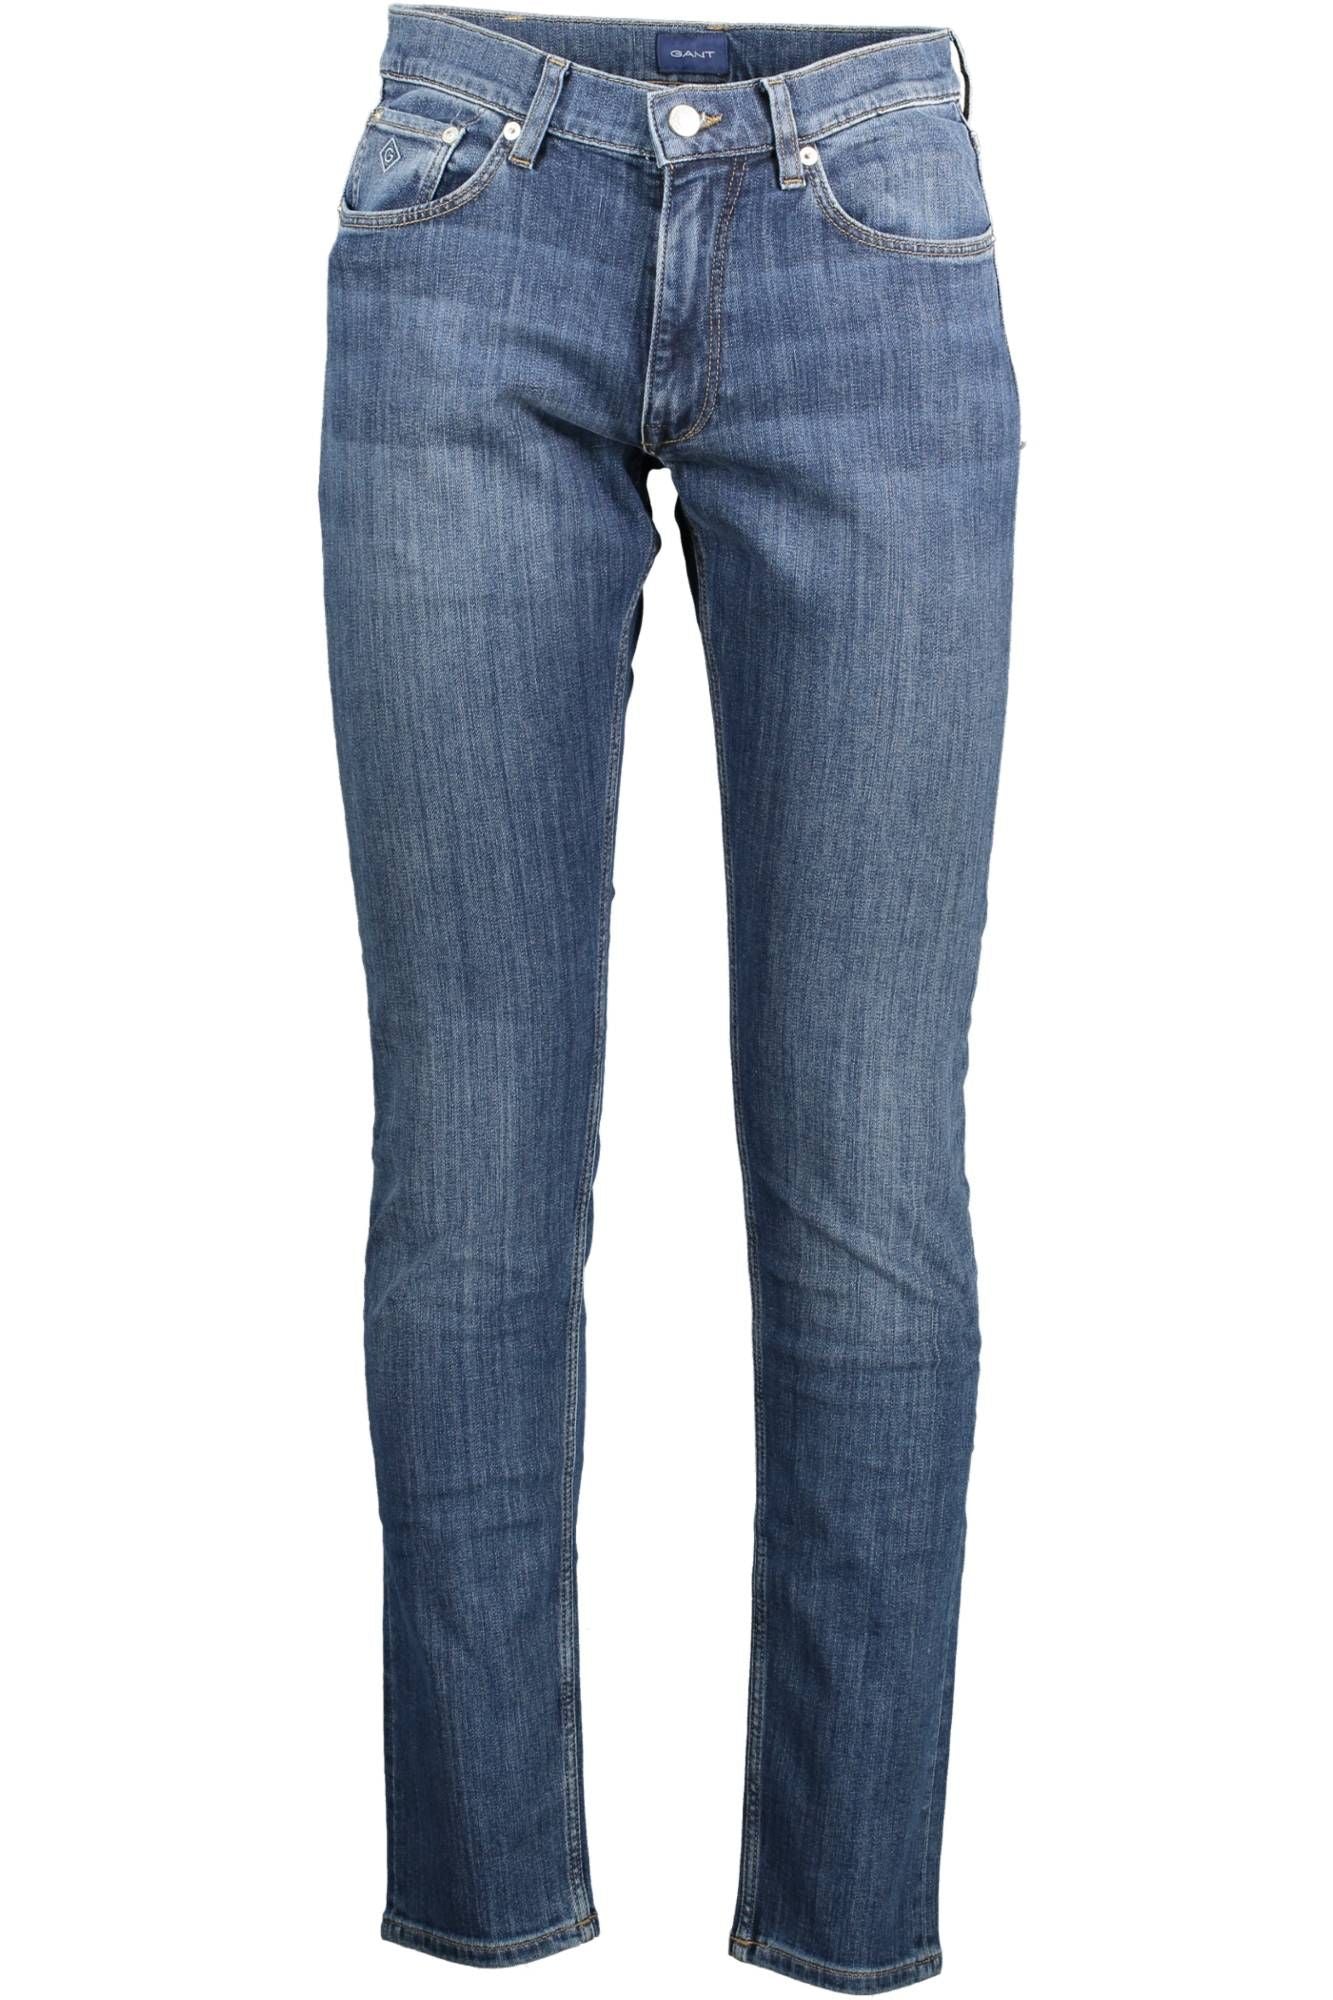 Chic Slim Fit Faded Blue Jeans